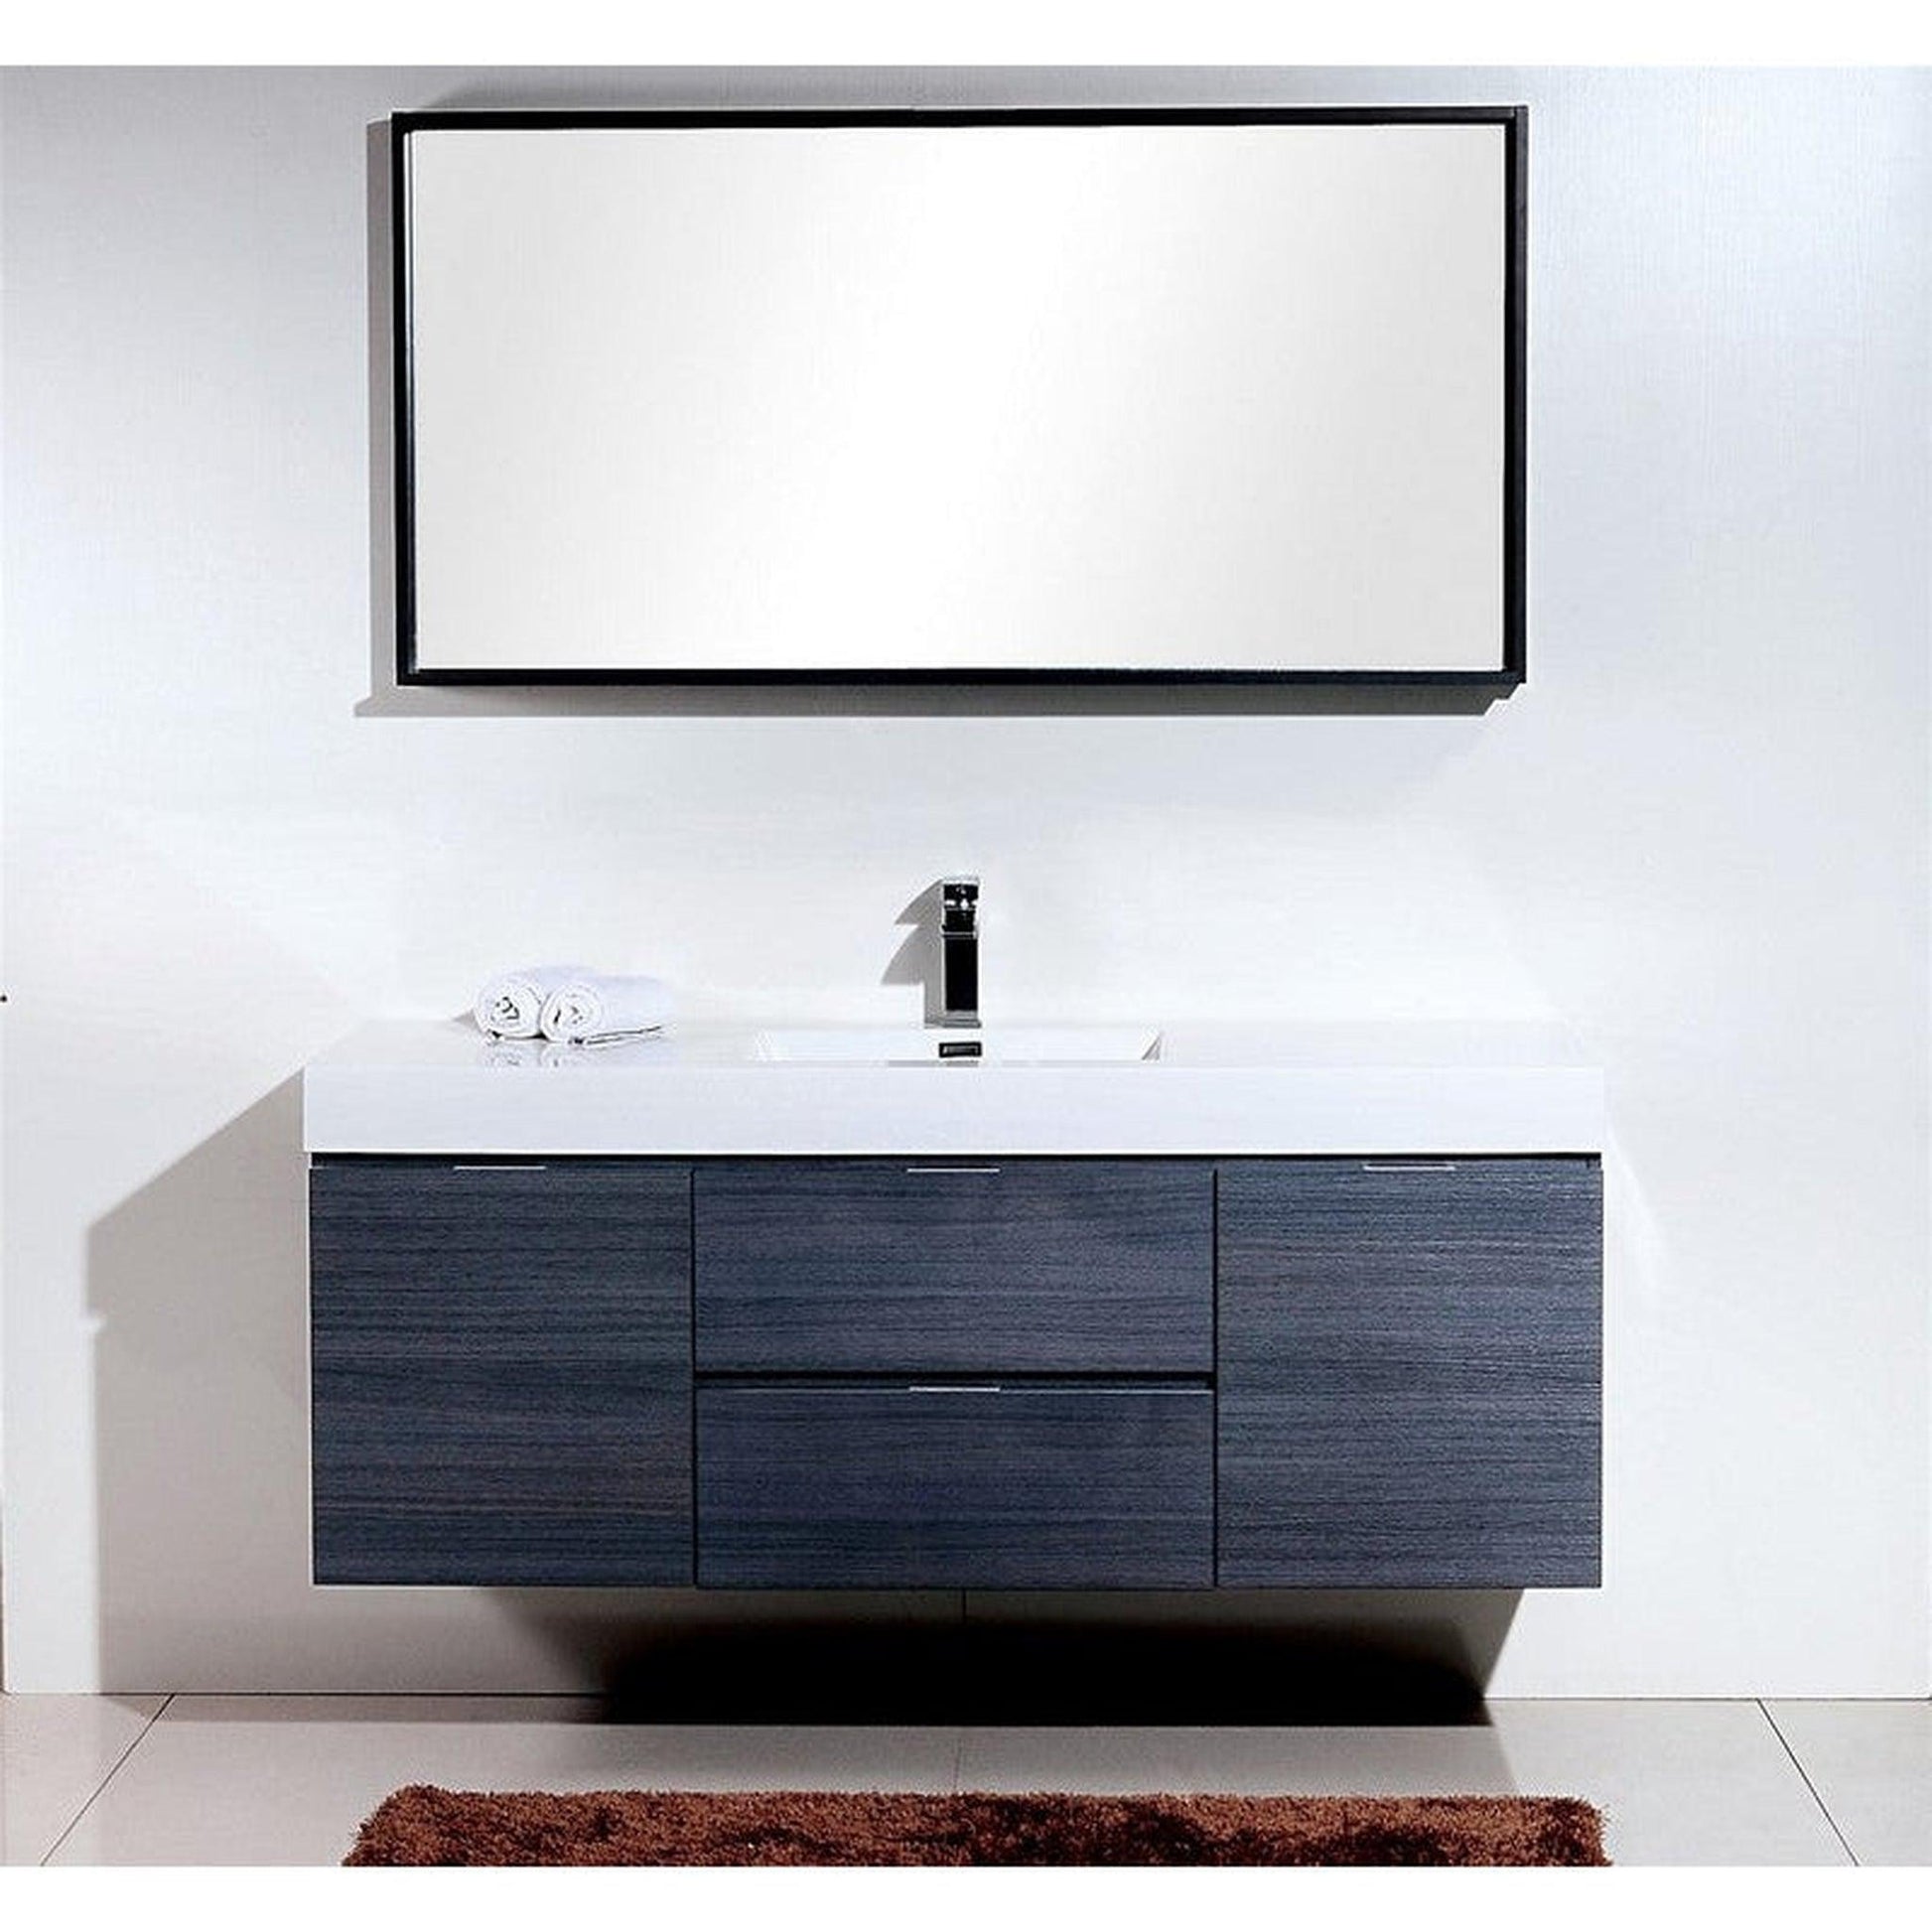 KubeBath Bliss 60" Gray Oak Wall-Mounted Modern Bathroom Vanity With Single Integrated Acrylic Sink With Overflow and 55" Gray Oak Framed Mirror With Shelf